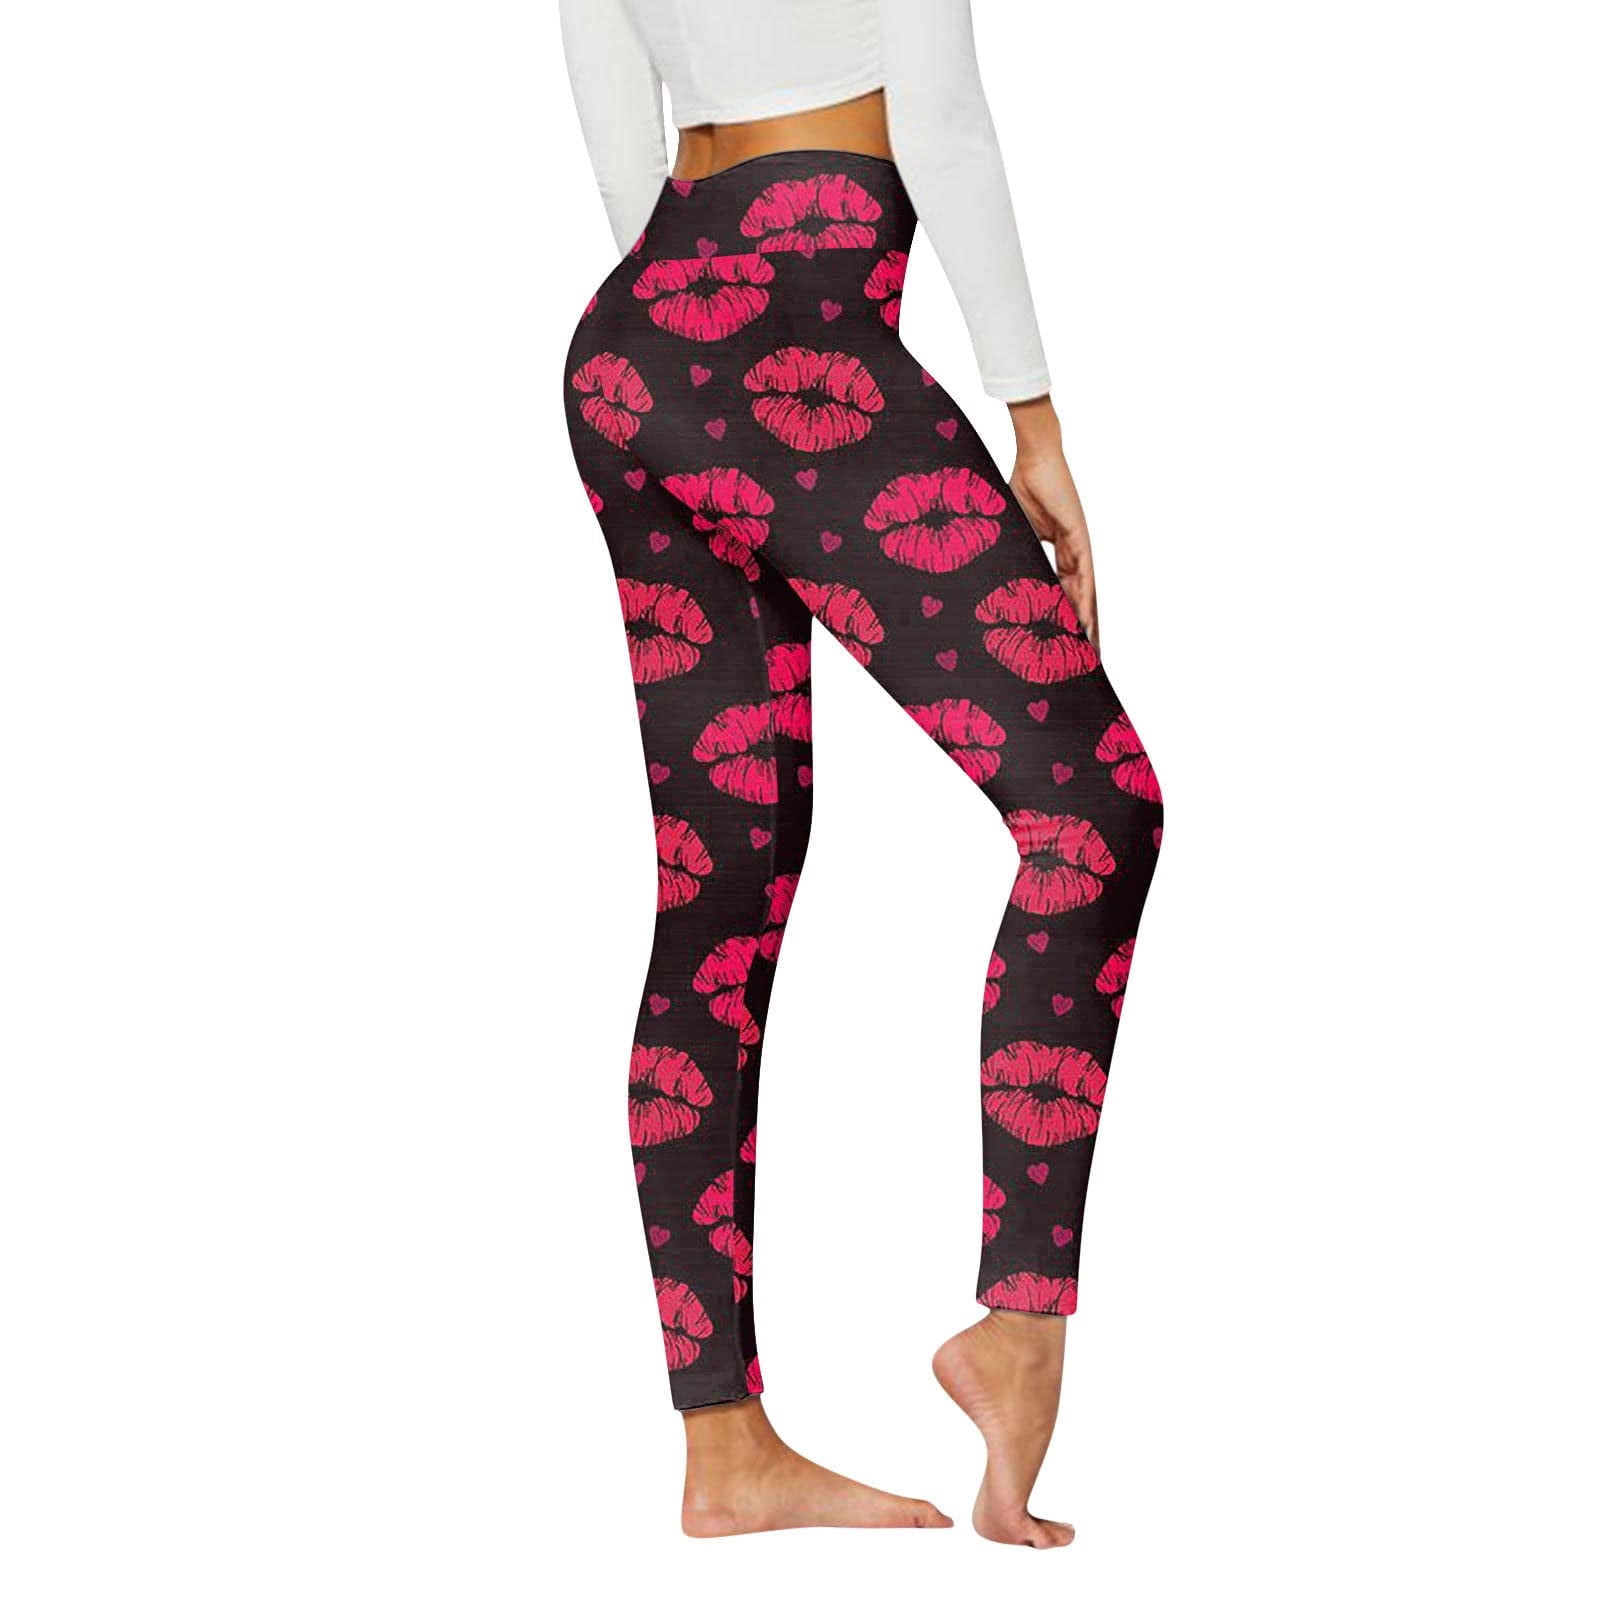 Chiccall Hip Lift High Waist Yoga Pants for Women, Tummy Control